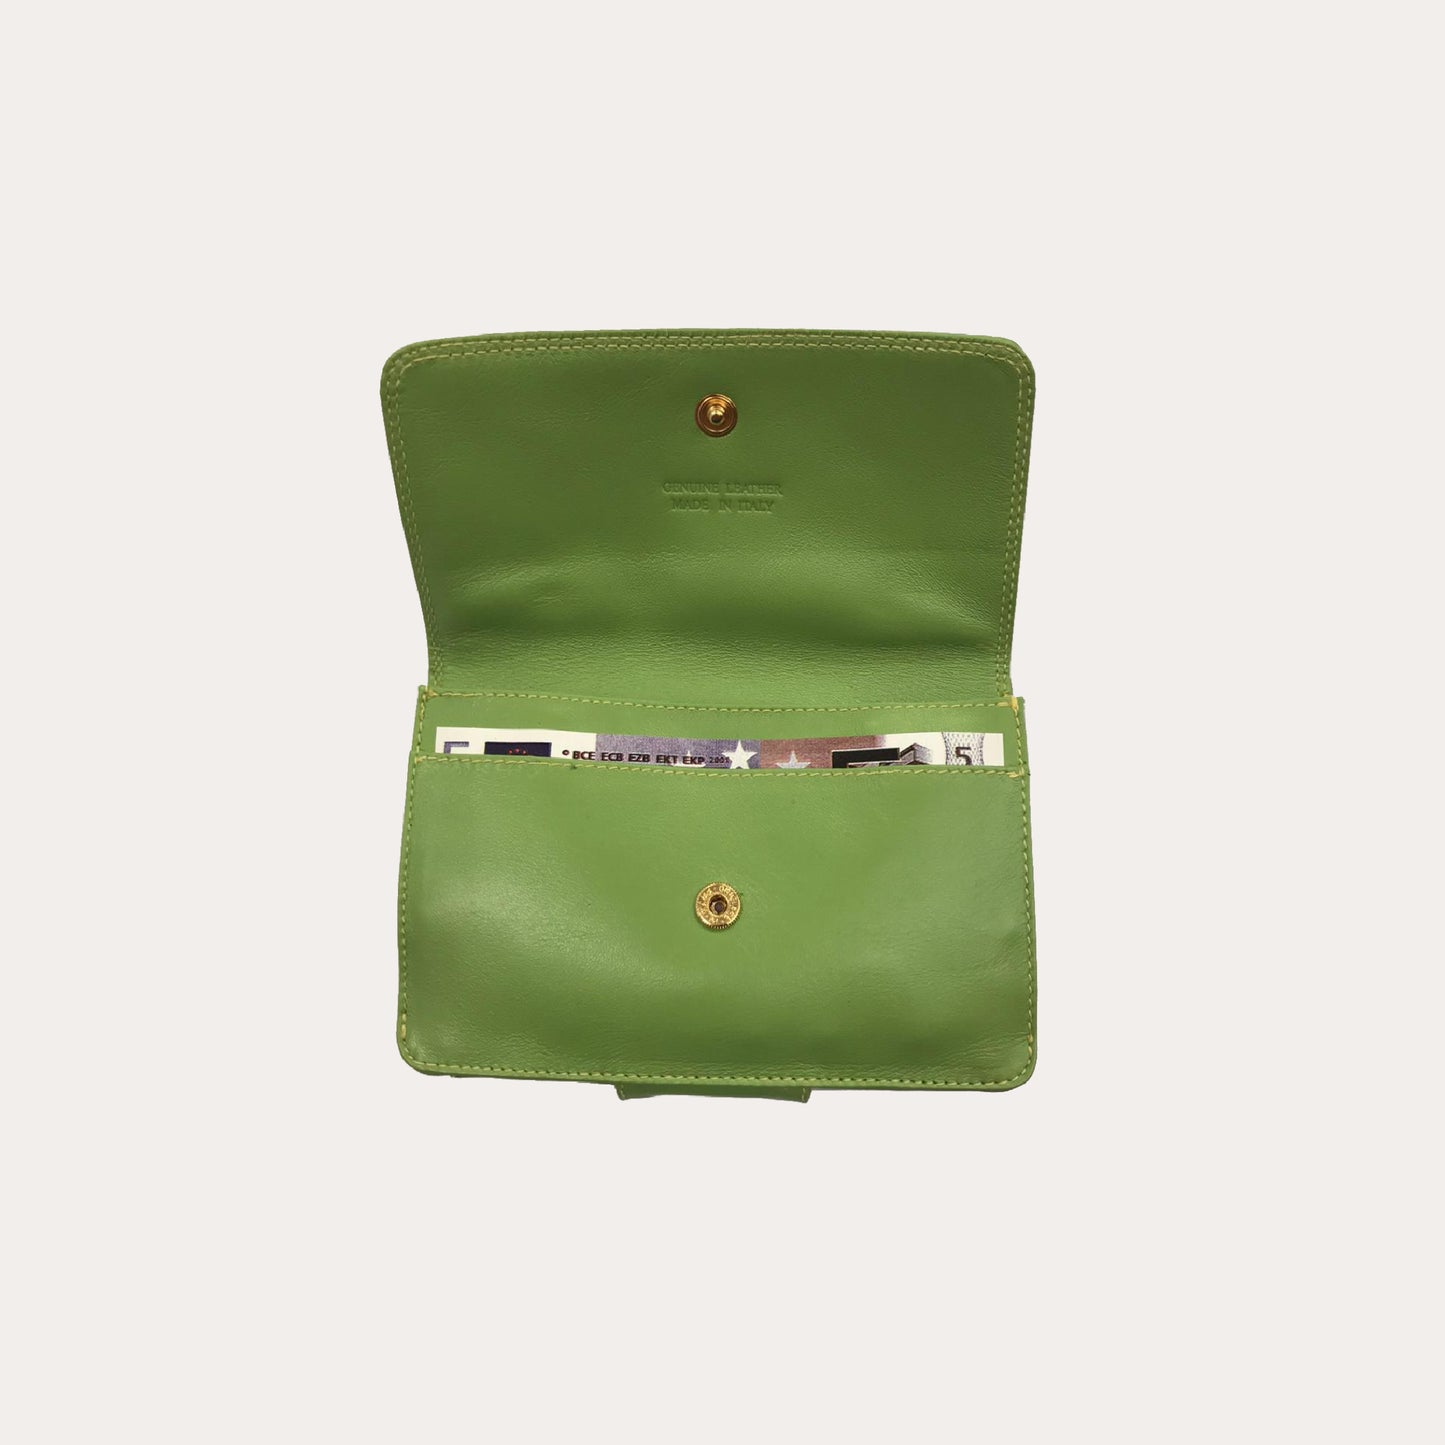 Lime Leather Purse